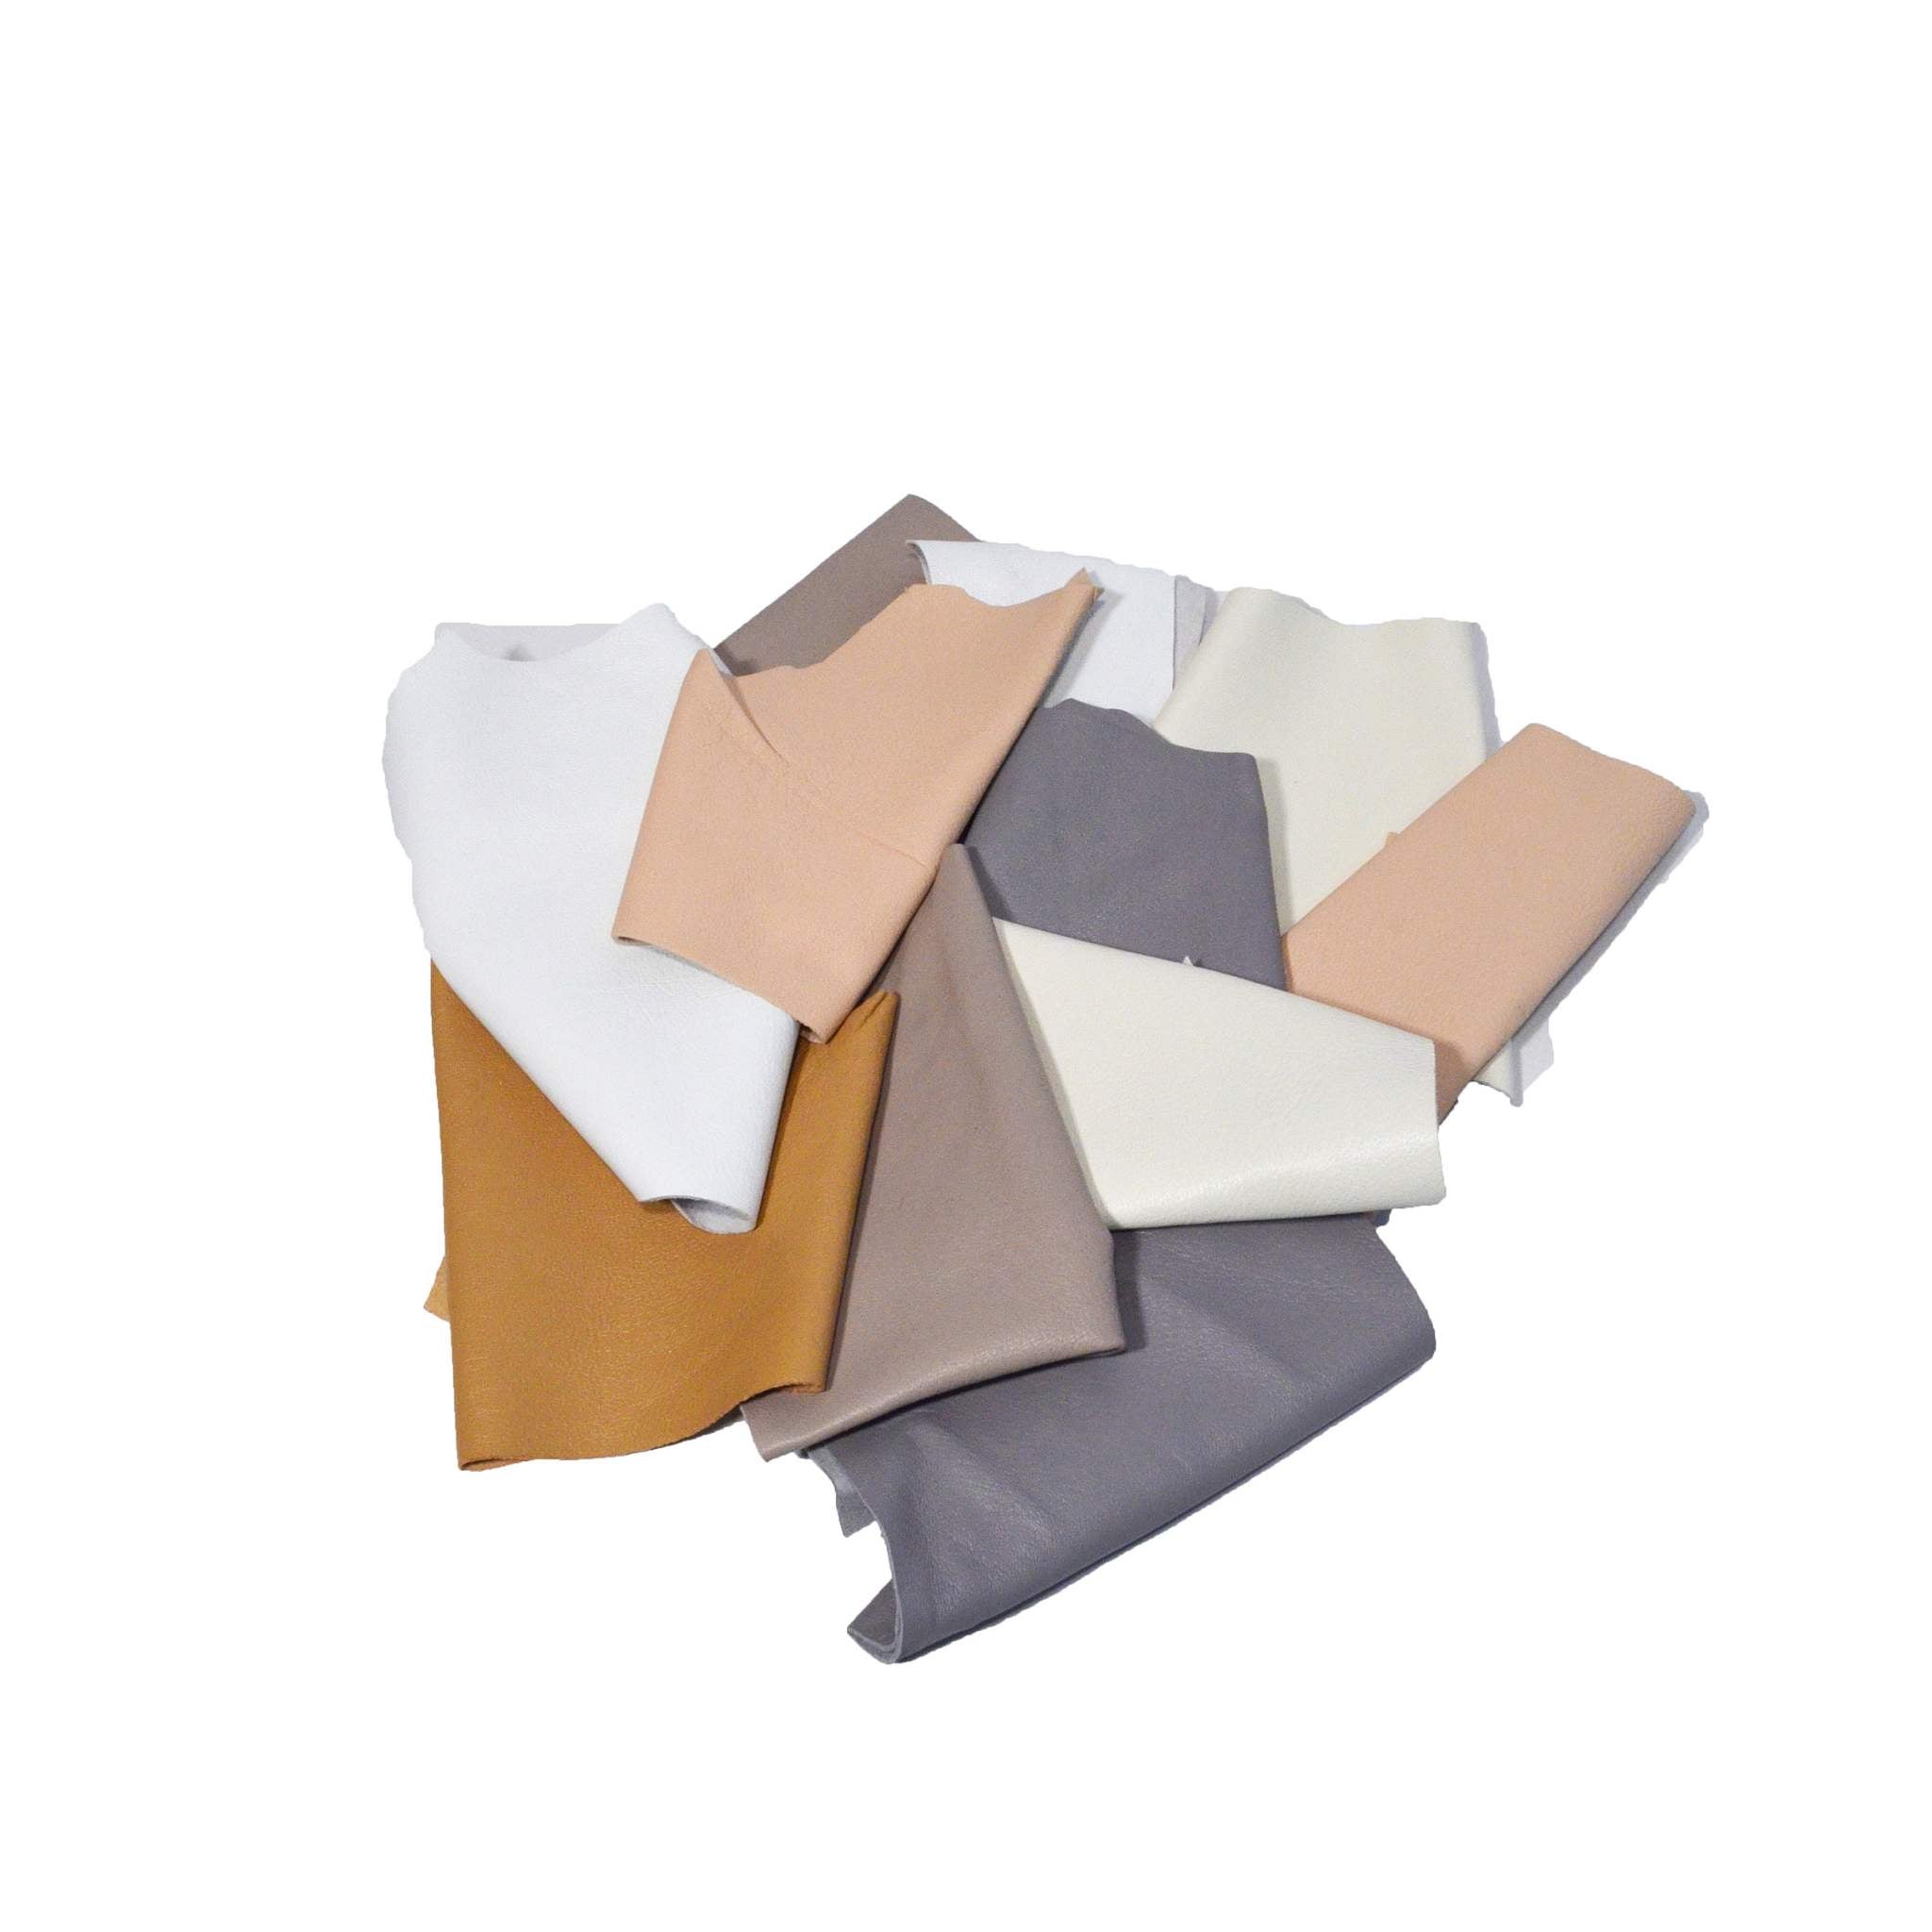 A bag of soft sheepskin leather pieces in neutral shades - whites, beiges, nude, pale grey etc., hand sized or smaller, suitable for applique, patchwork, mixed media, jewelry and other crafts